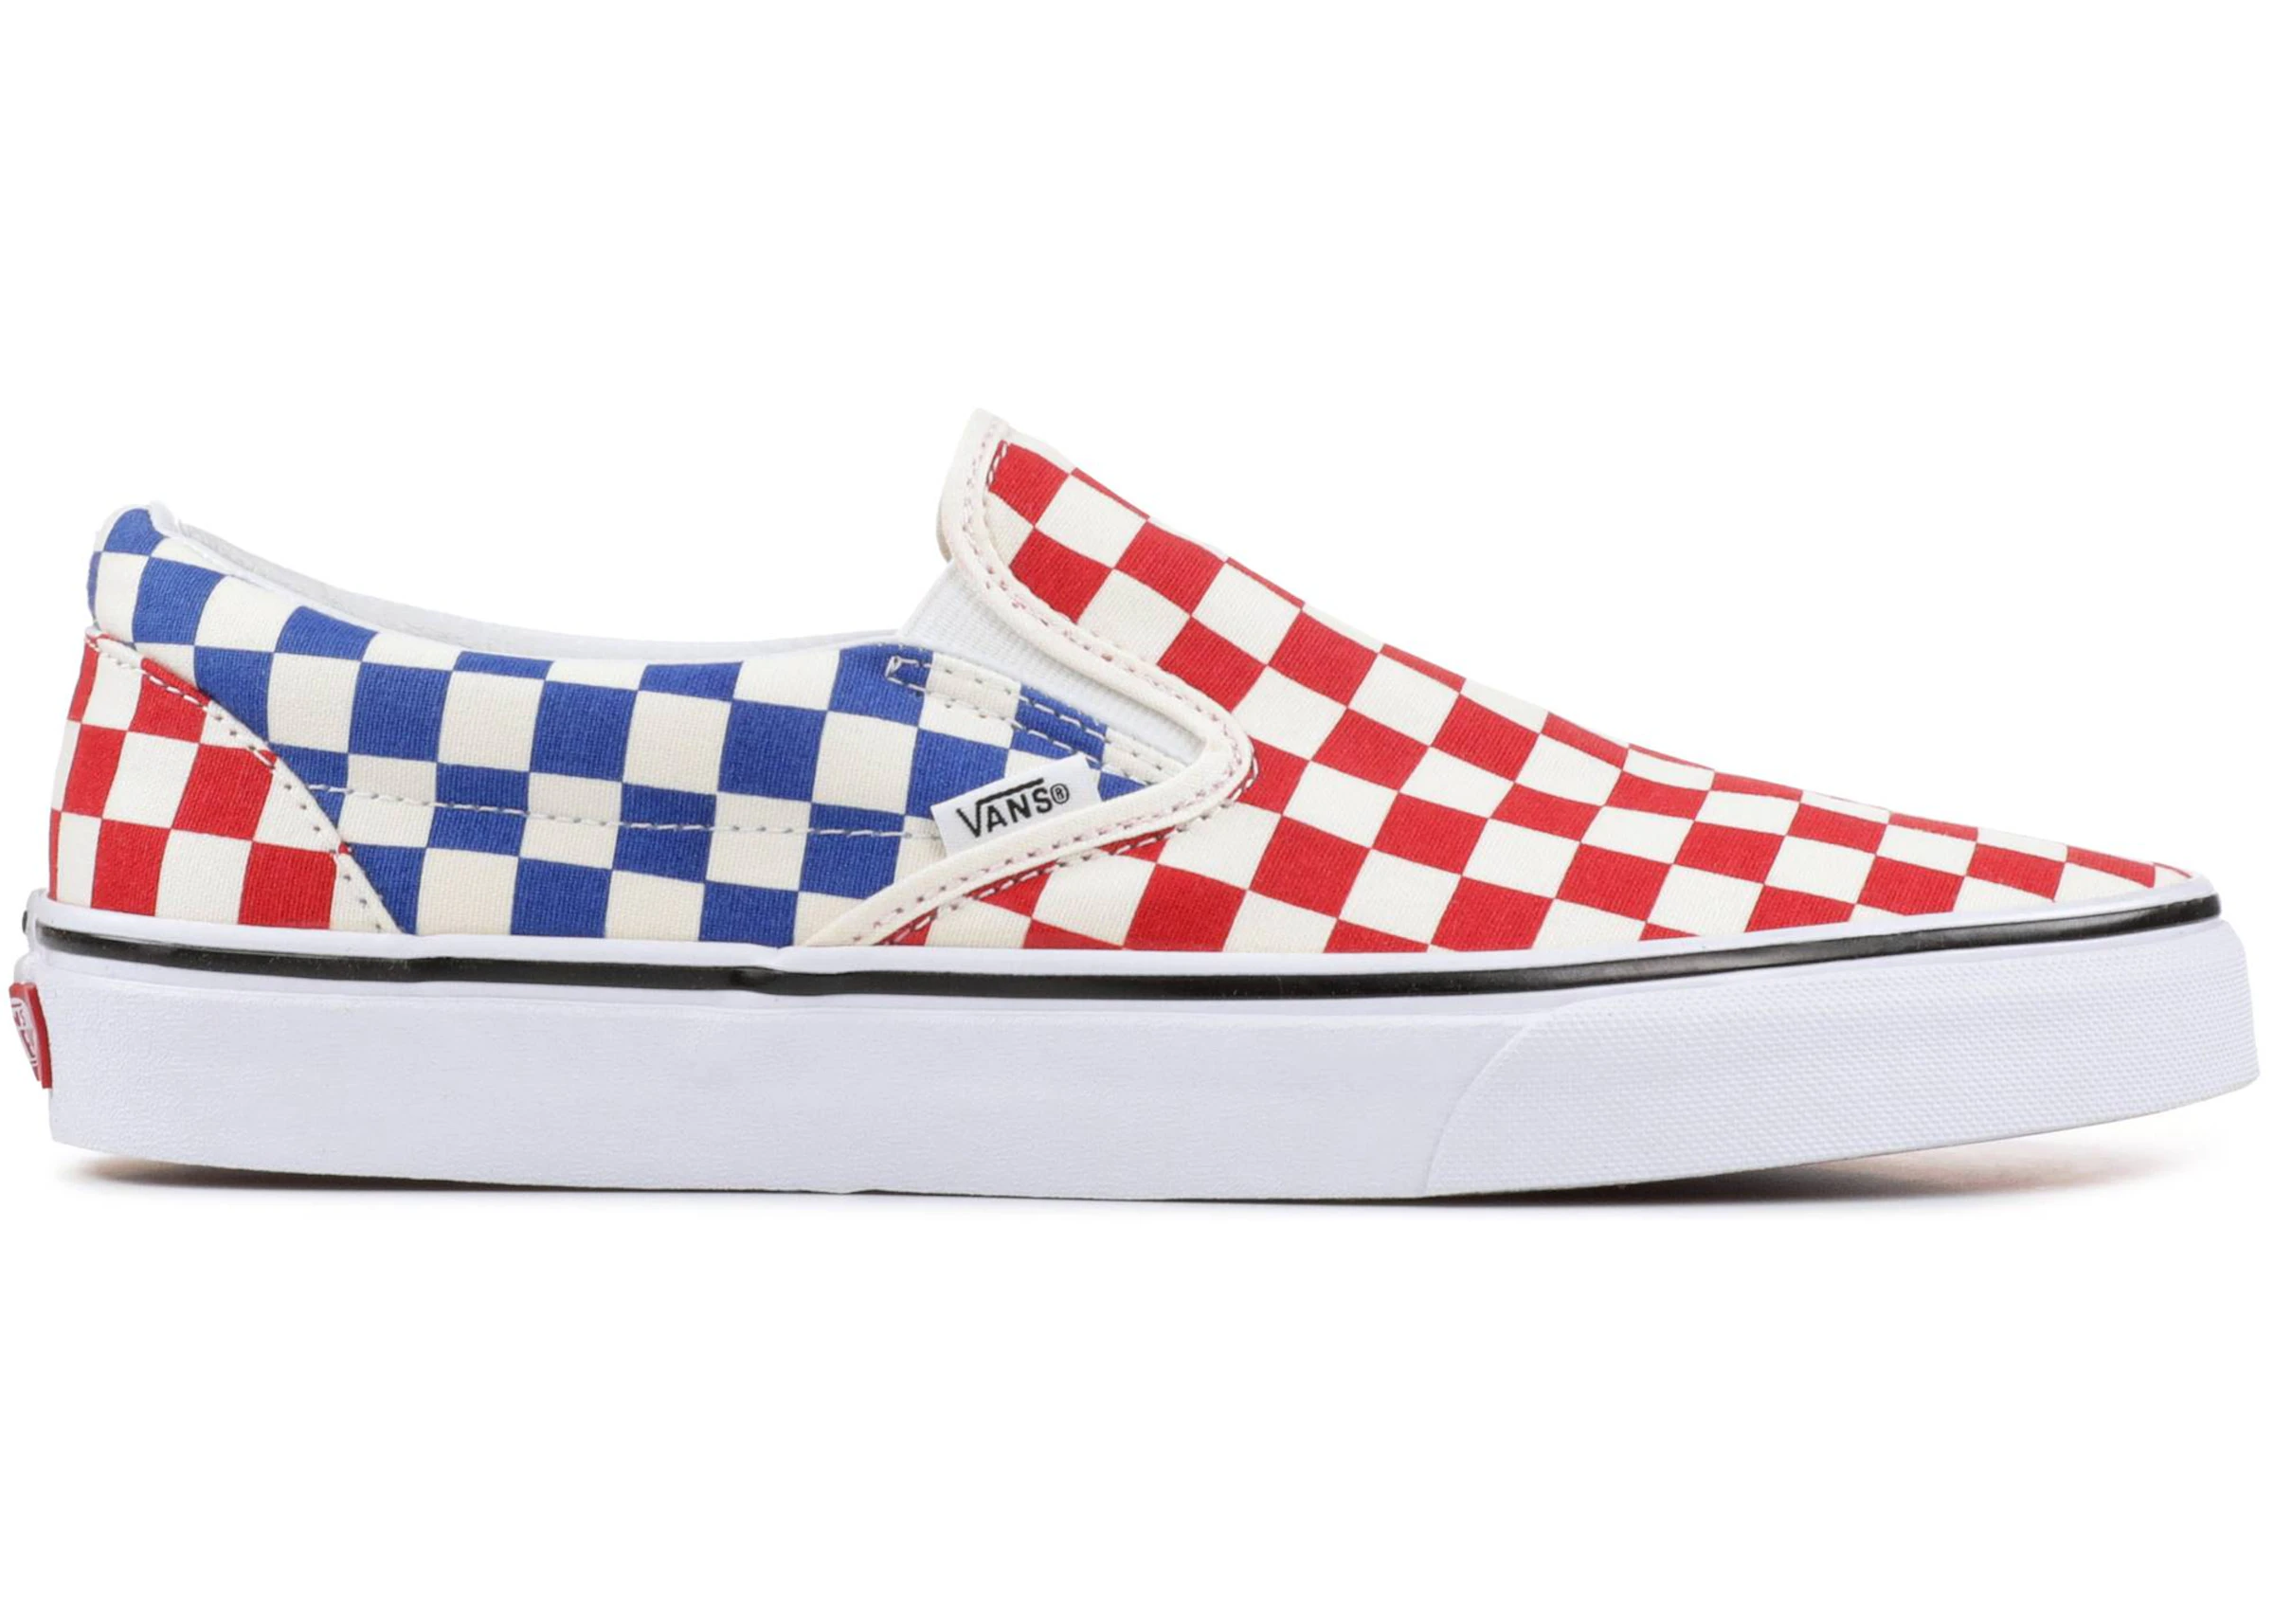 Vans Checkerboard Blue Red | peacecommission.kdsg.gov.ng